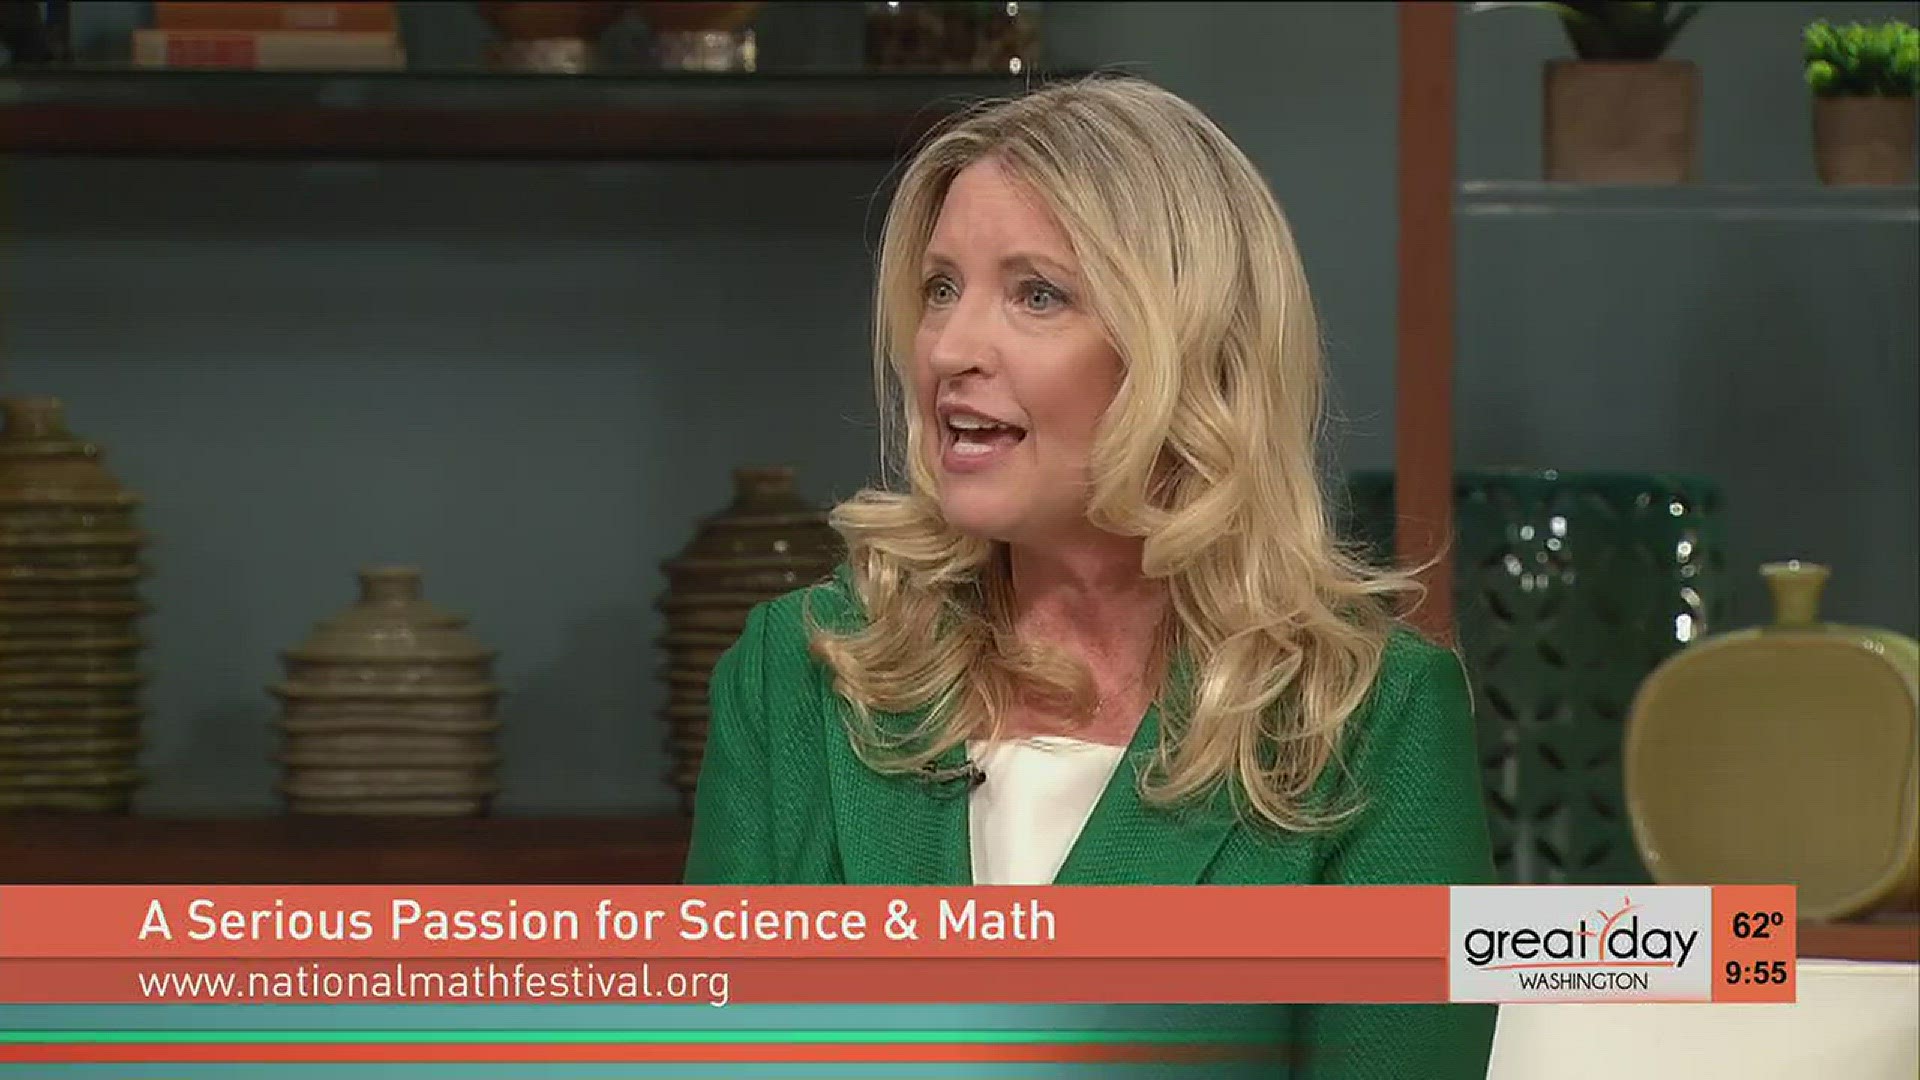 Former NFL cheerleader Mary Carolyn Becker talks about her lifelong passion for mathematics ahead of the National Math Festival.